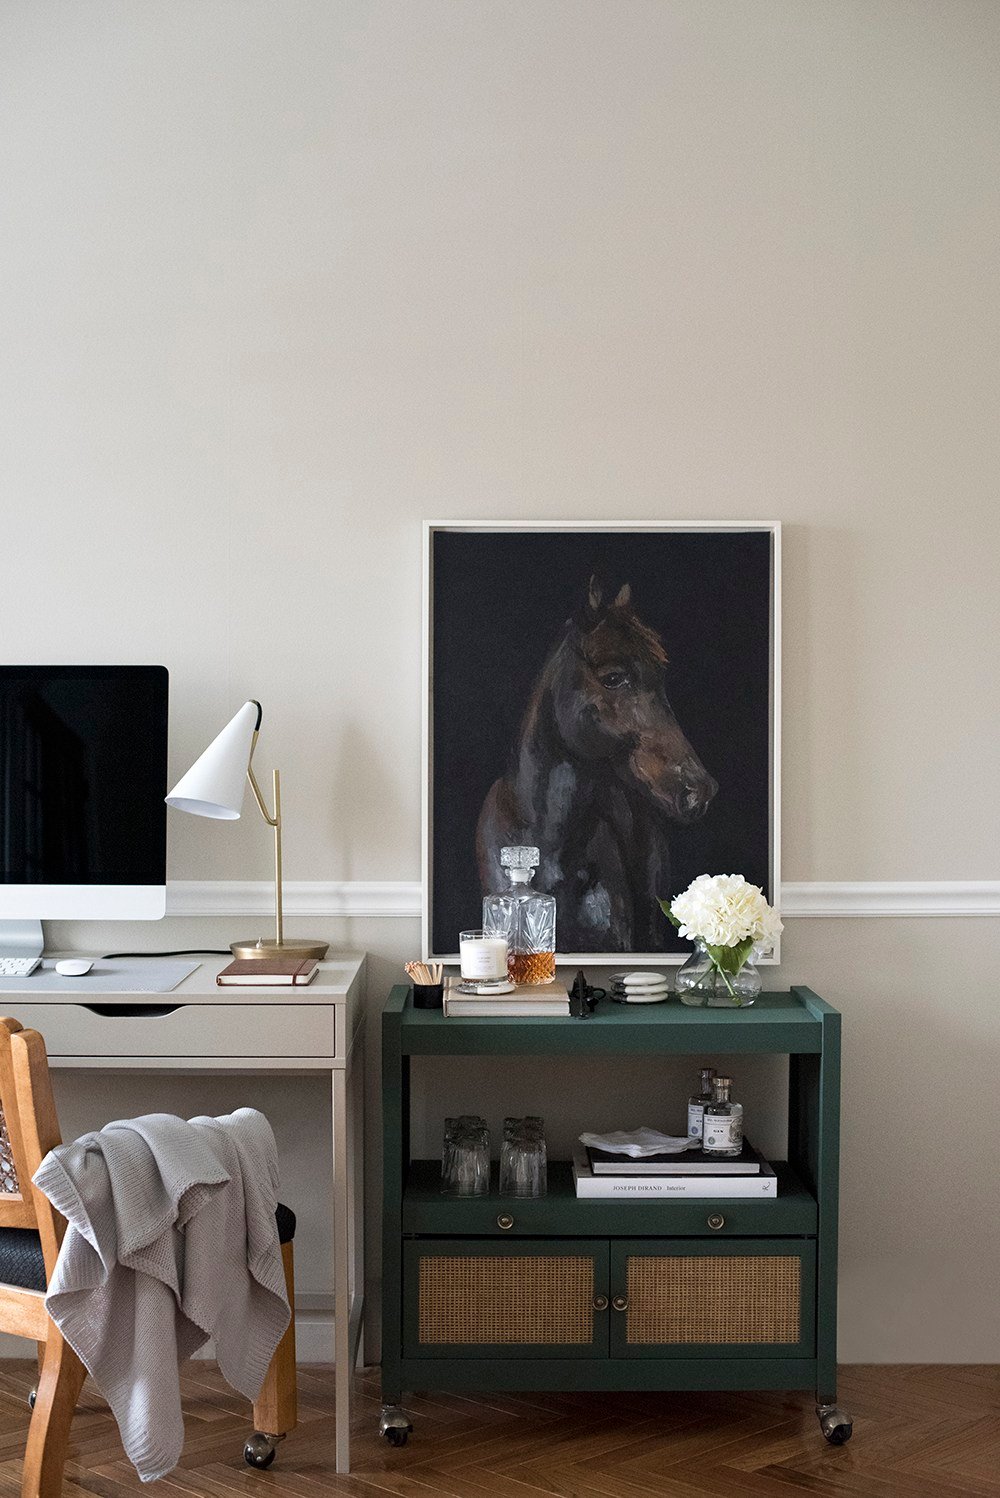 Best of Etsy : Equestrian Art - roomfortuesday.com